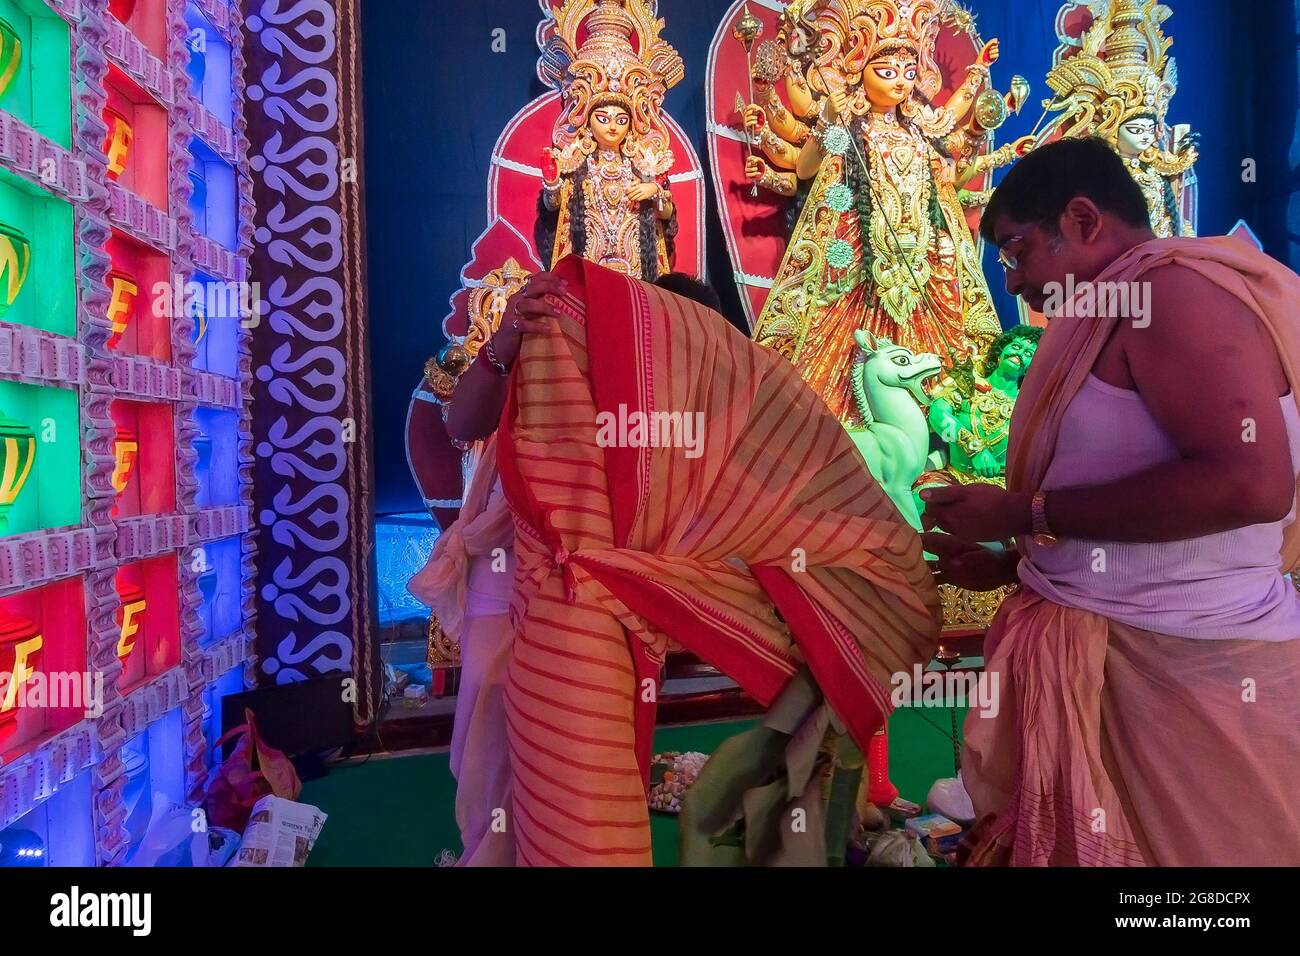 Howrah,West Bengal,India - 24th October 24 : Priests draping red